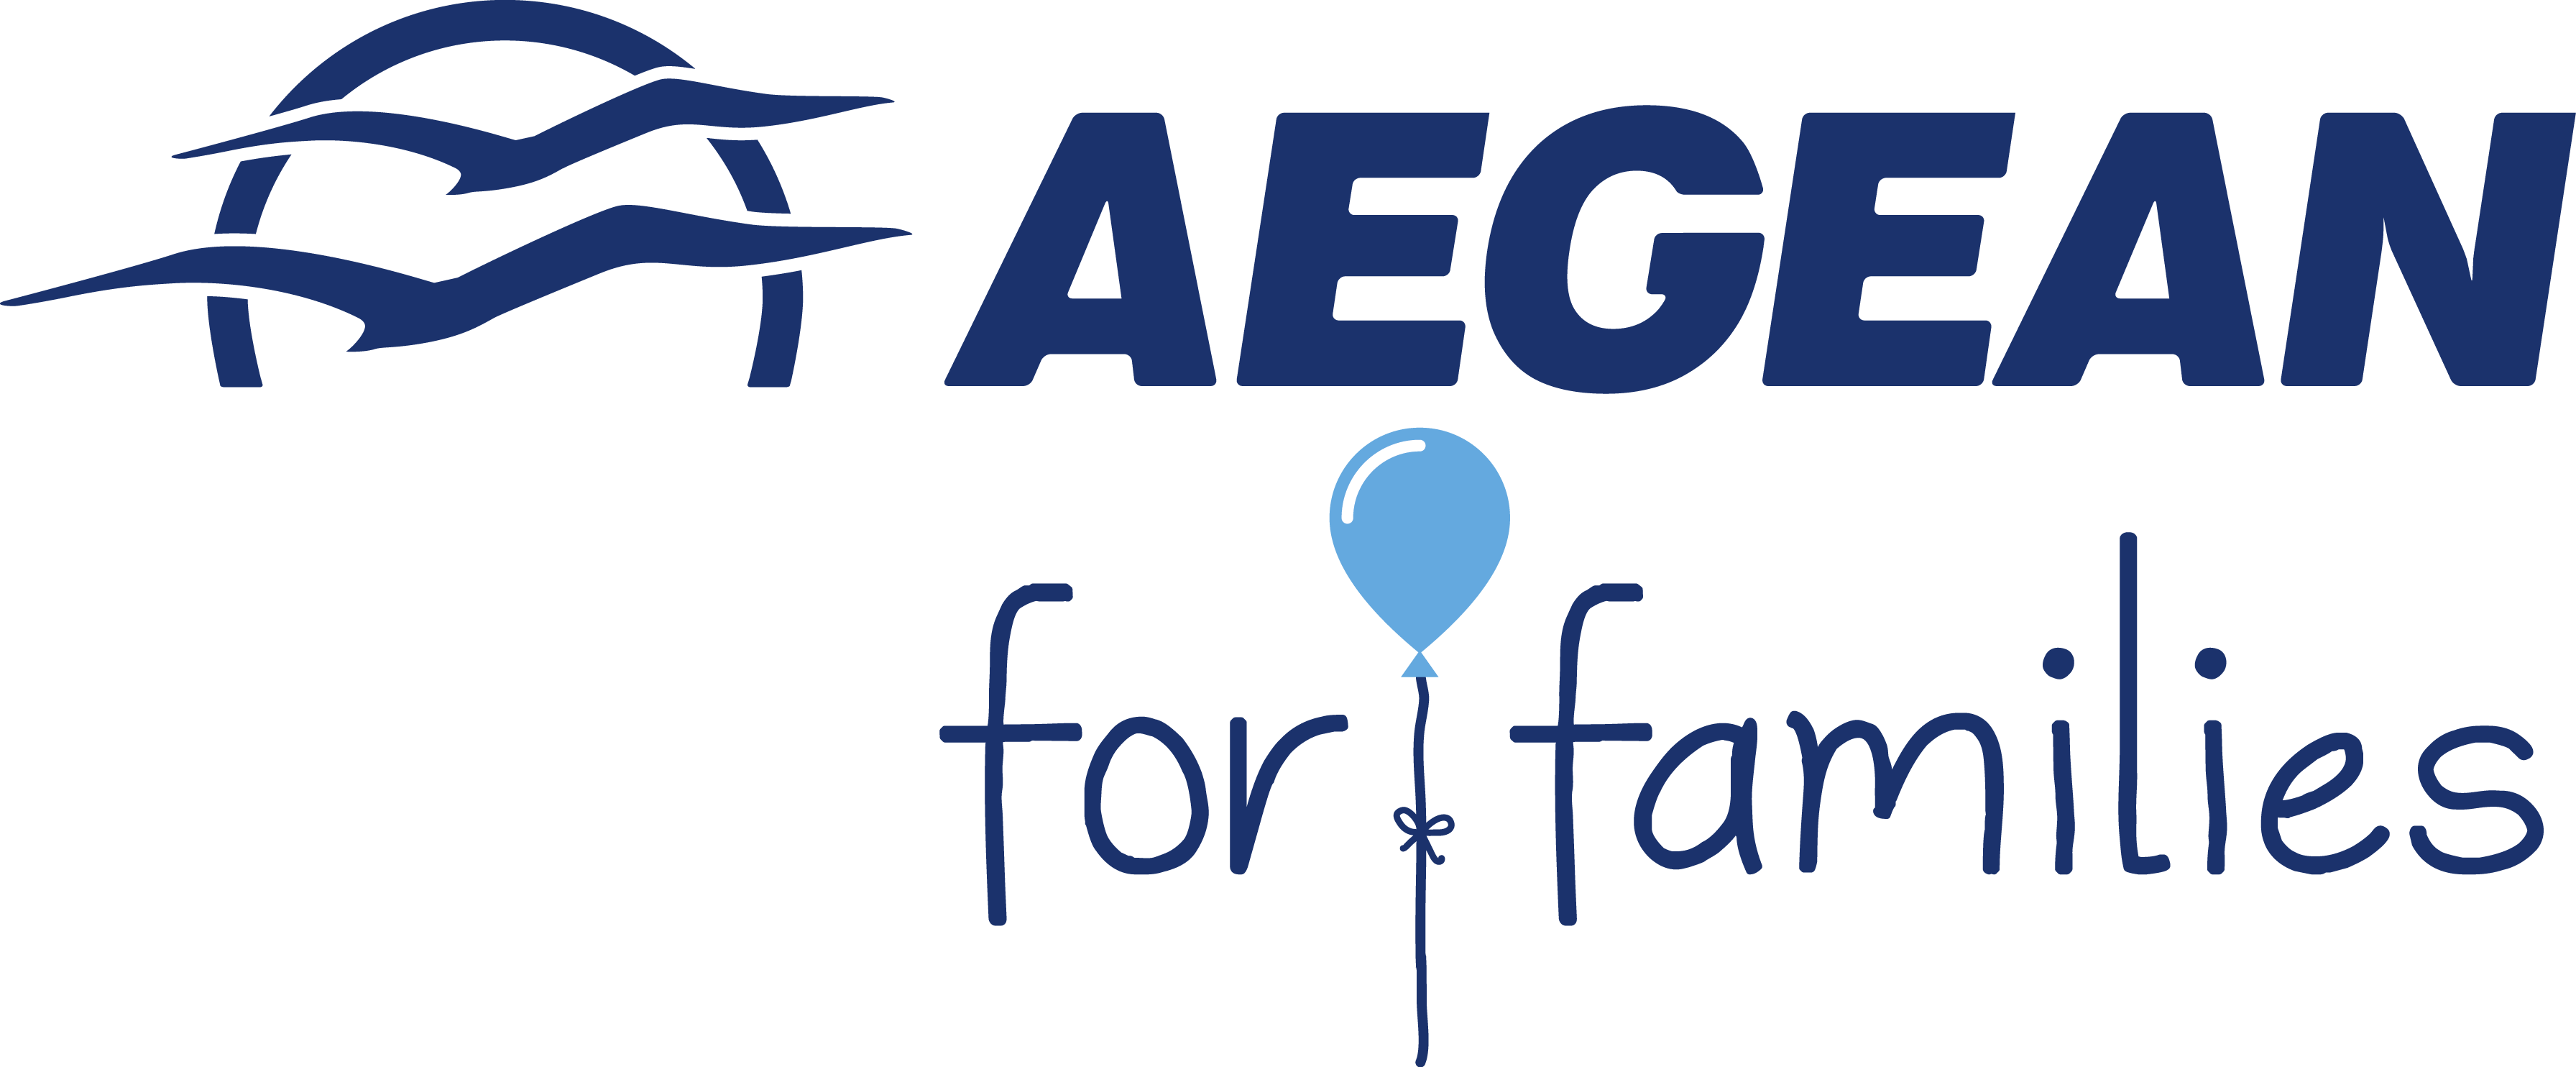 Aegean For Families - New designed Services for families